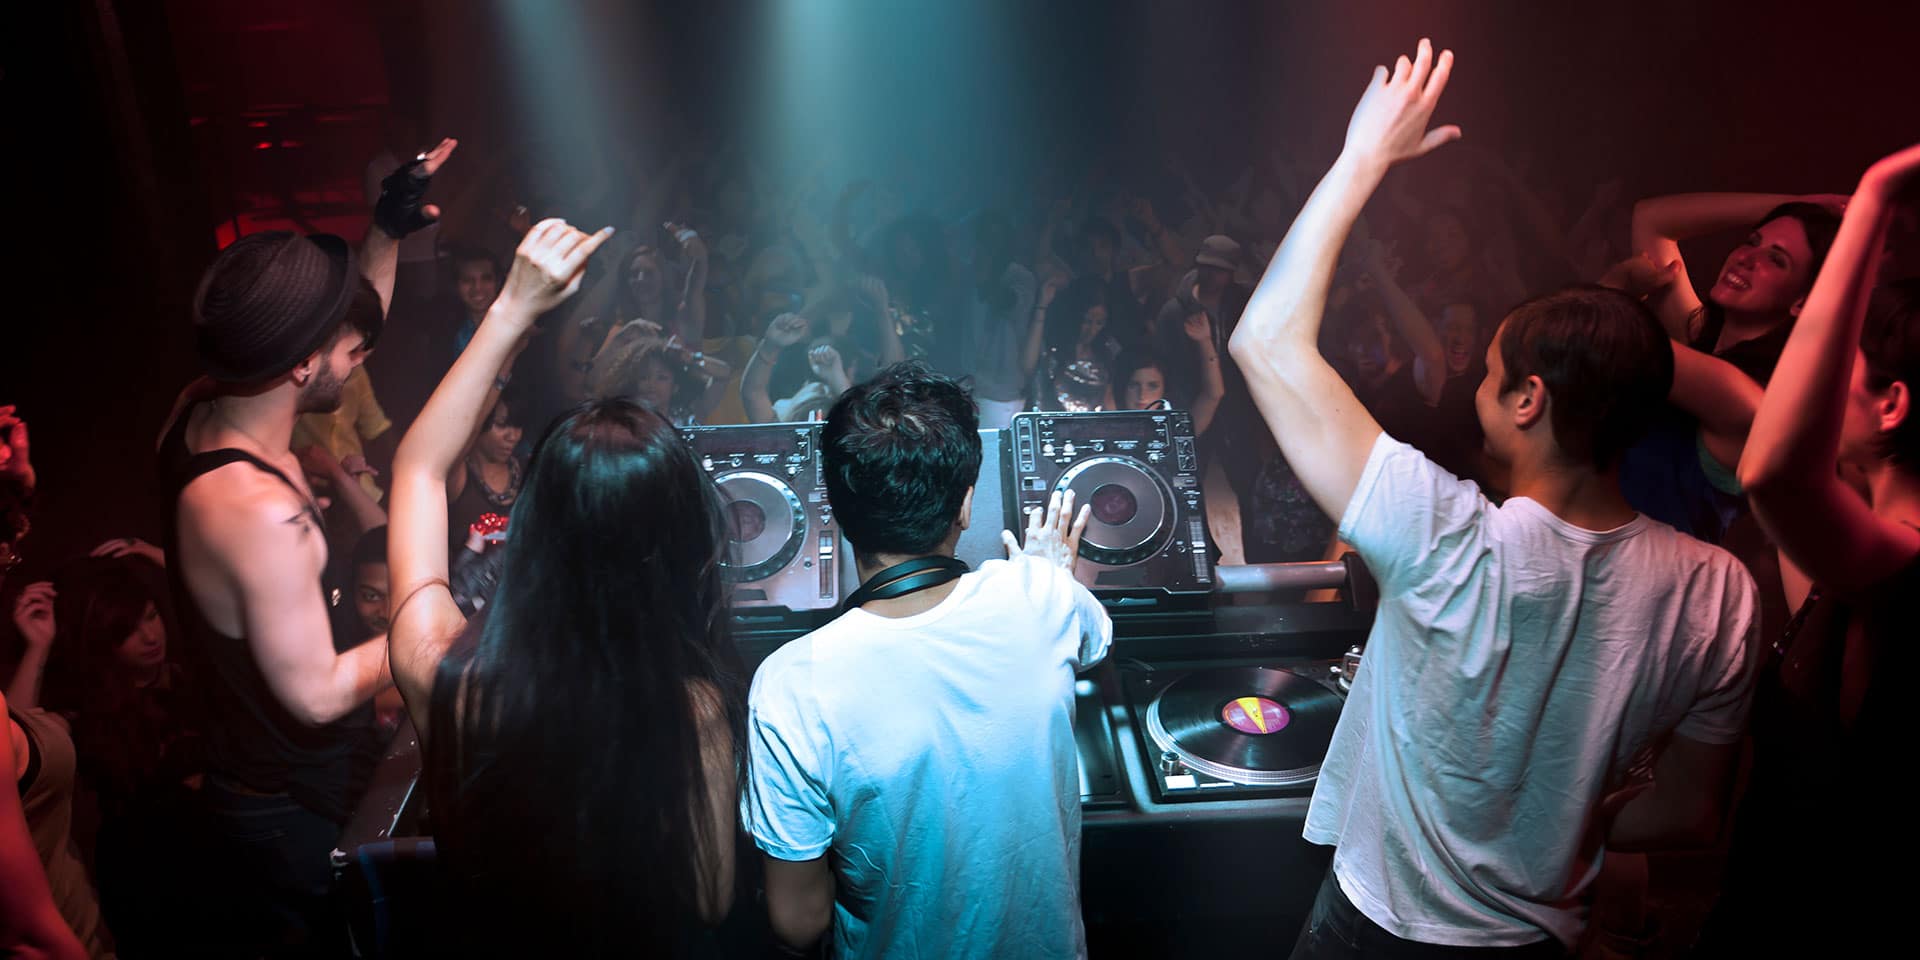 Nightlife in Sao Paulo: The Best Bars, Clubs, & More